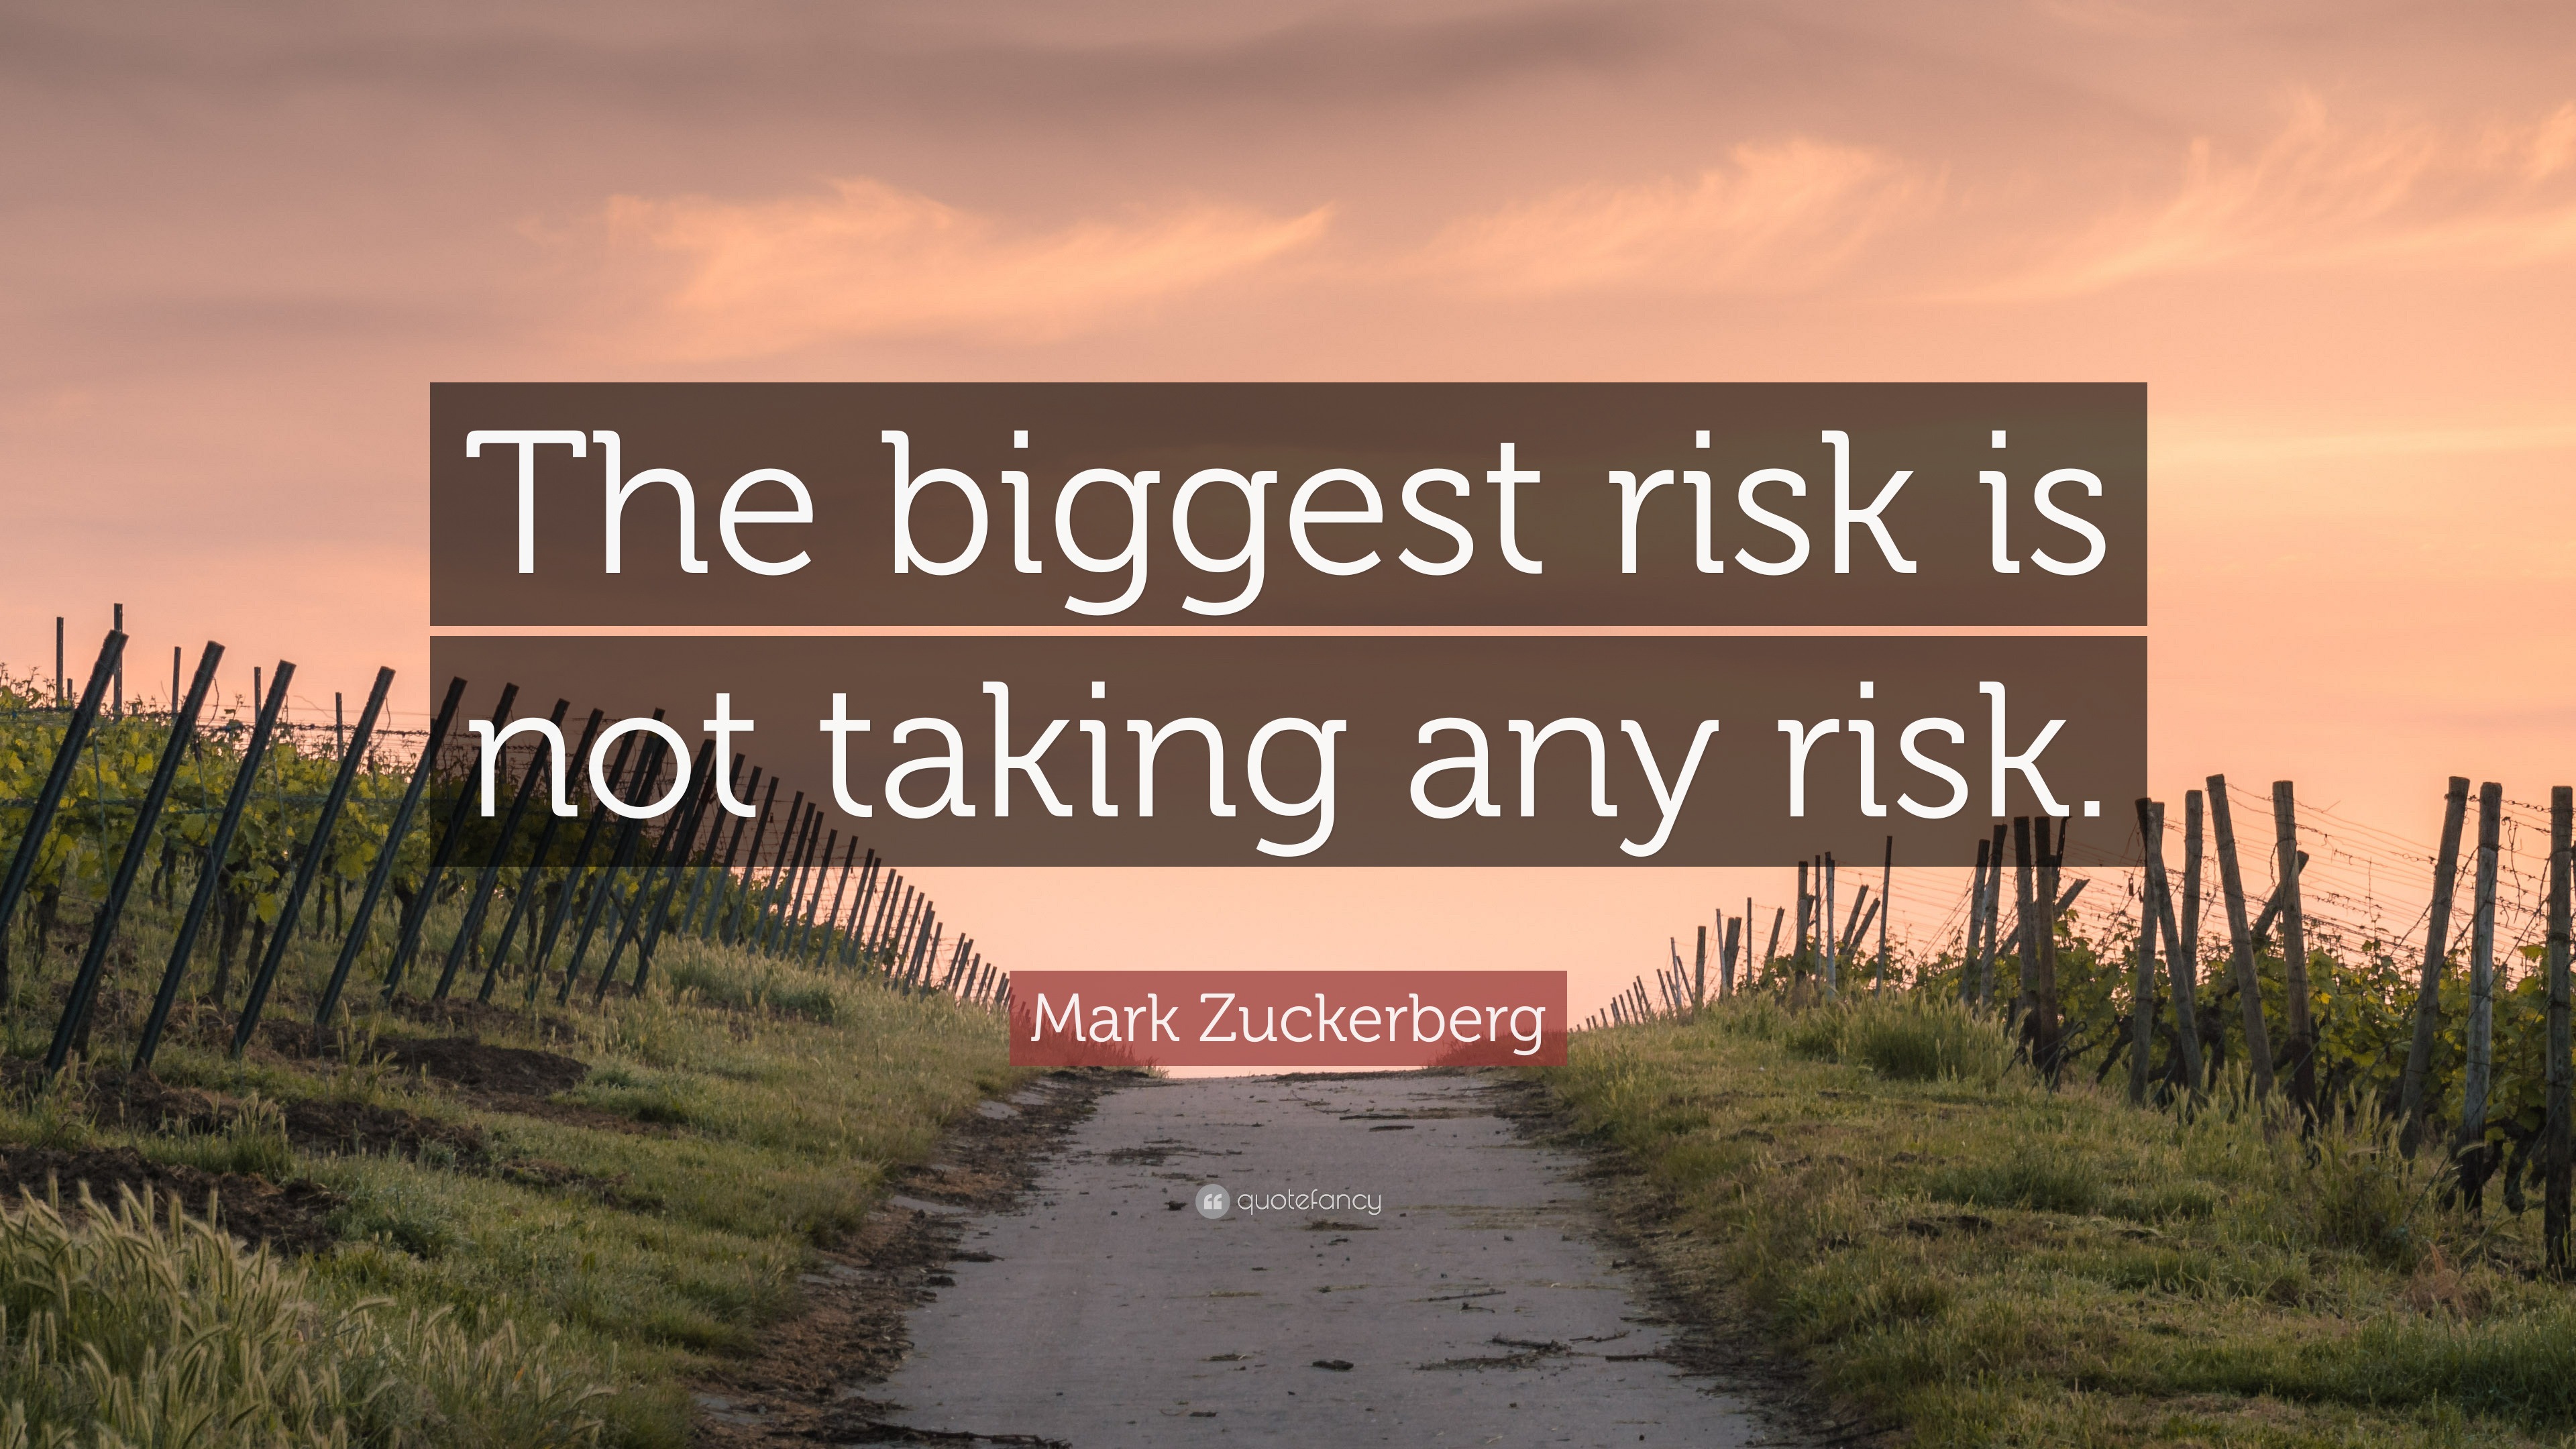 2019528 Mark Zuckerberg Quote The biggest risk is not taking any risk